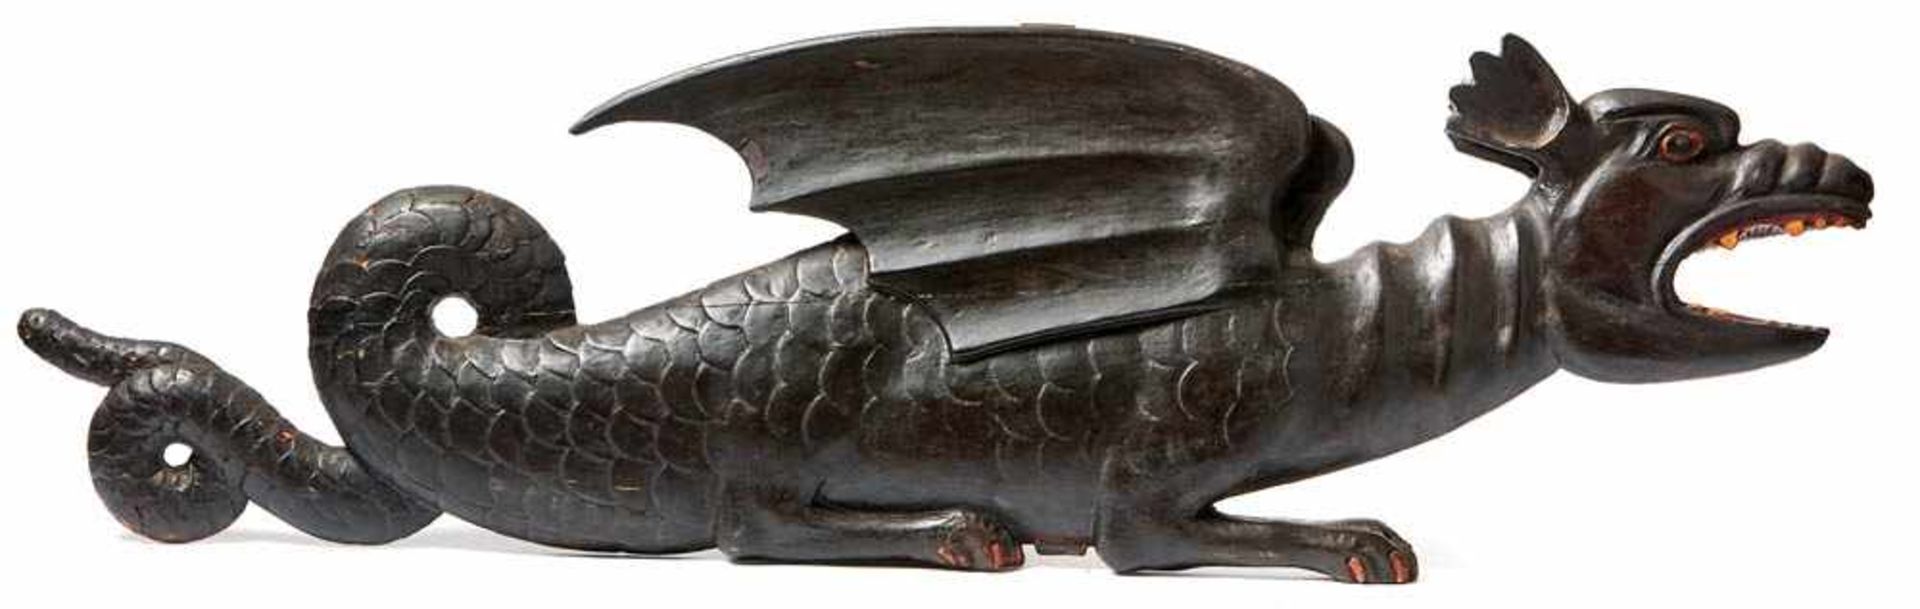 Dragon18th centuryFlat carved relief of a dragon with wide open mouth. Wood, carved and painted.